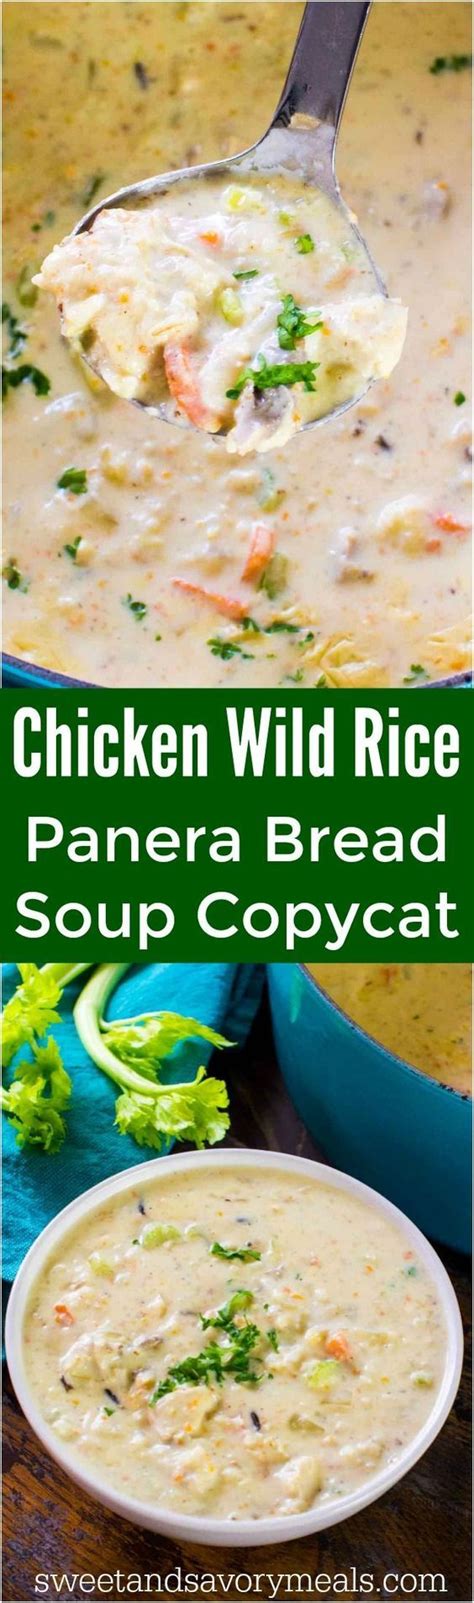 Wild rice is a favorite in soups because it's nutty and more toothsome than plain white or brown rice, and it holds up well without getting mushy. Panera Bread Chicken Wild Rice Soup Copycat [VIDEO ...